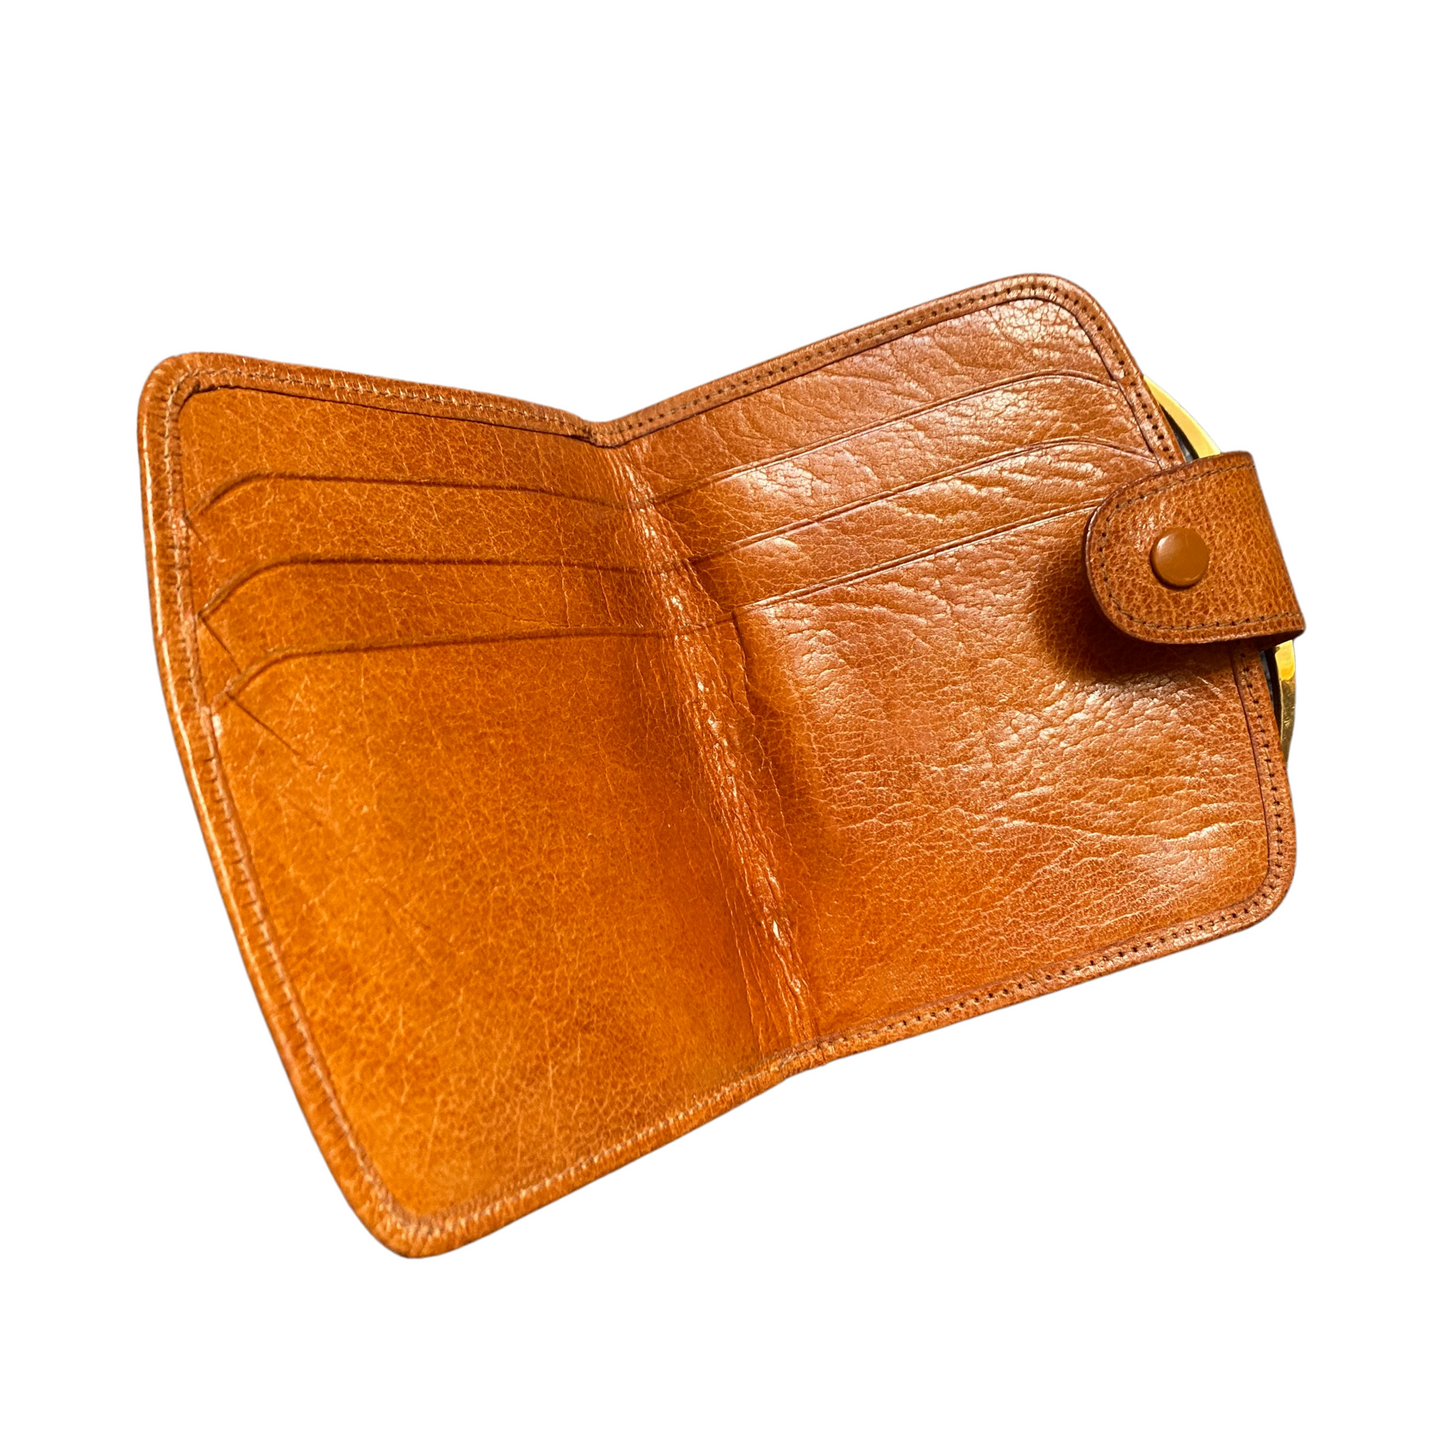 Elegant tan leather wallet by Mico